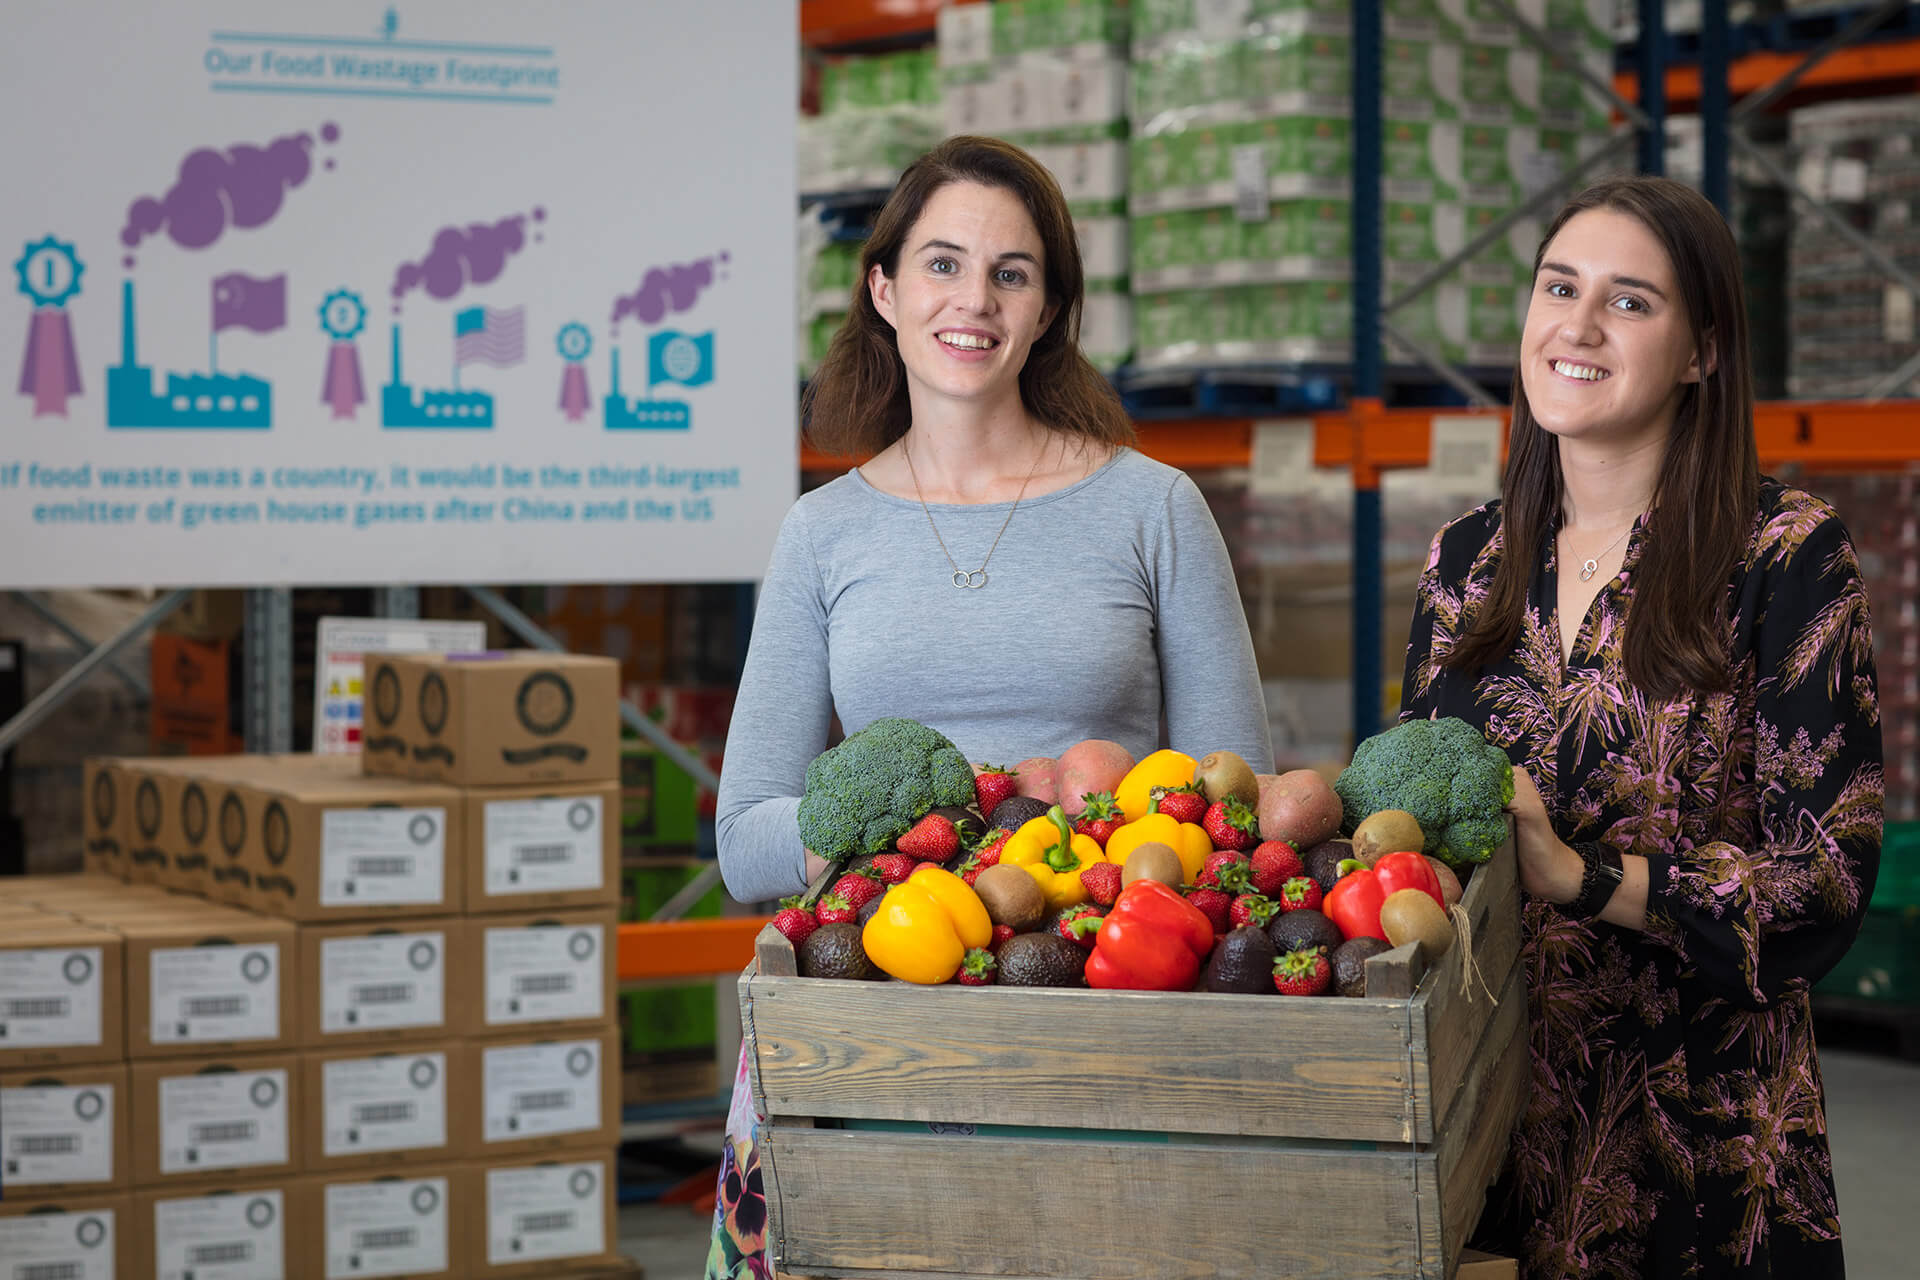 Ep. 2:  Feeding kindness through tackling food poverty – Iseult Ward and Aoibheann O’Brien, co-founders of FoodCloud